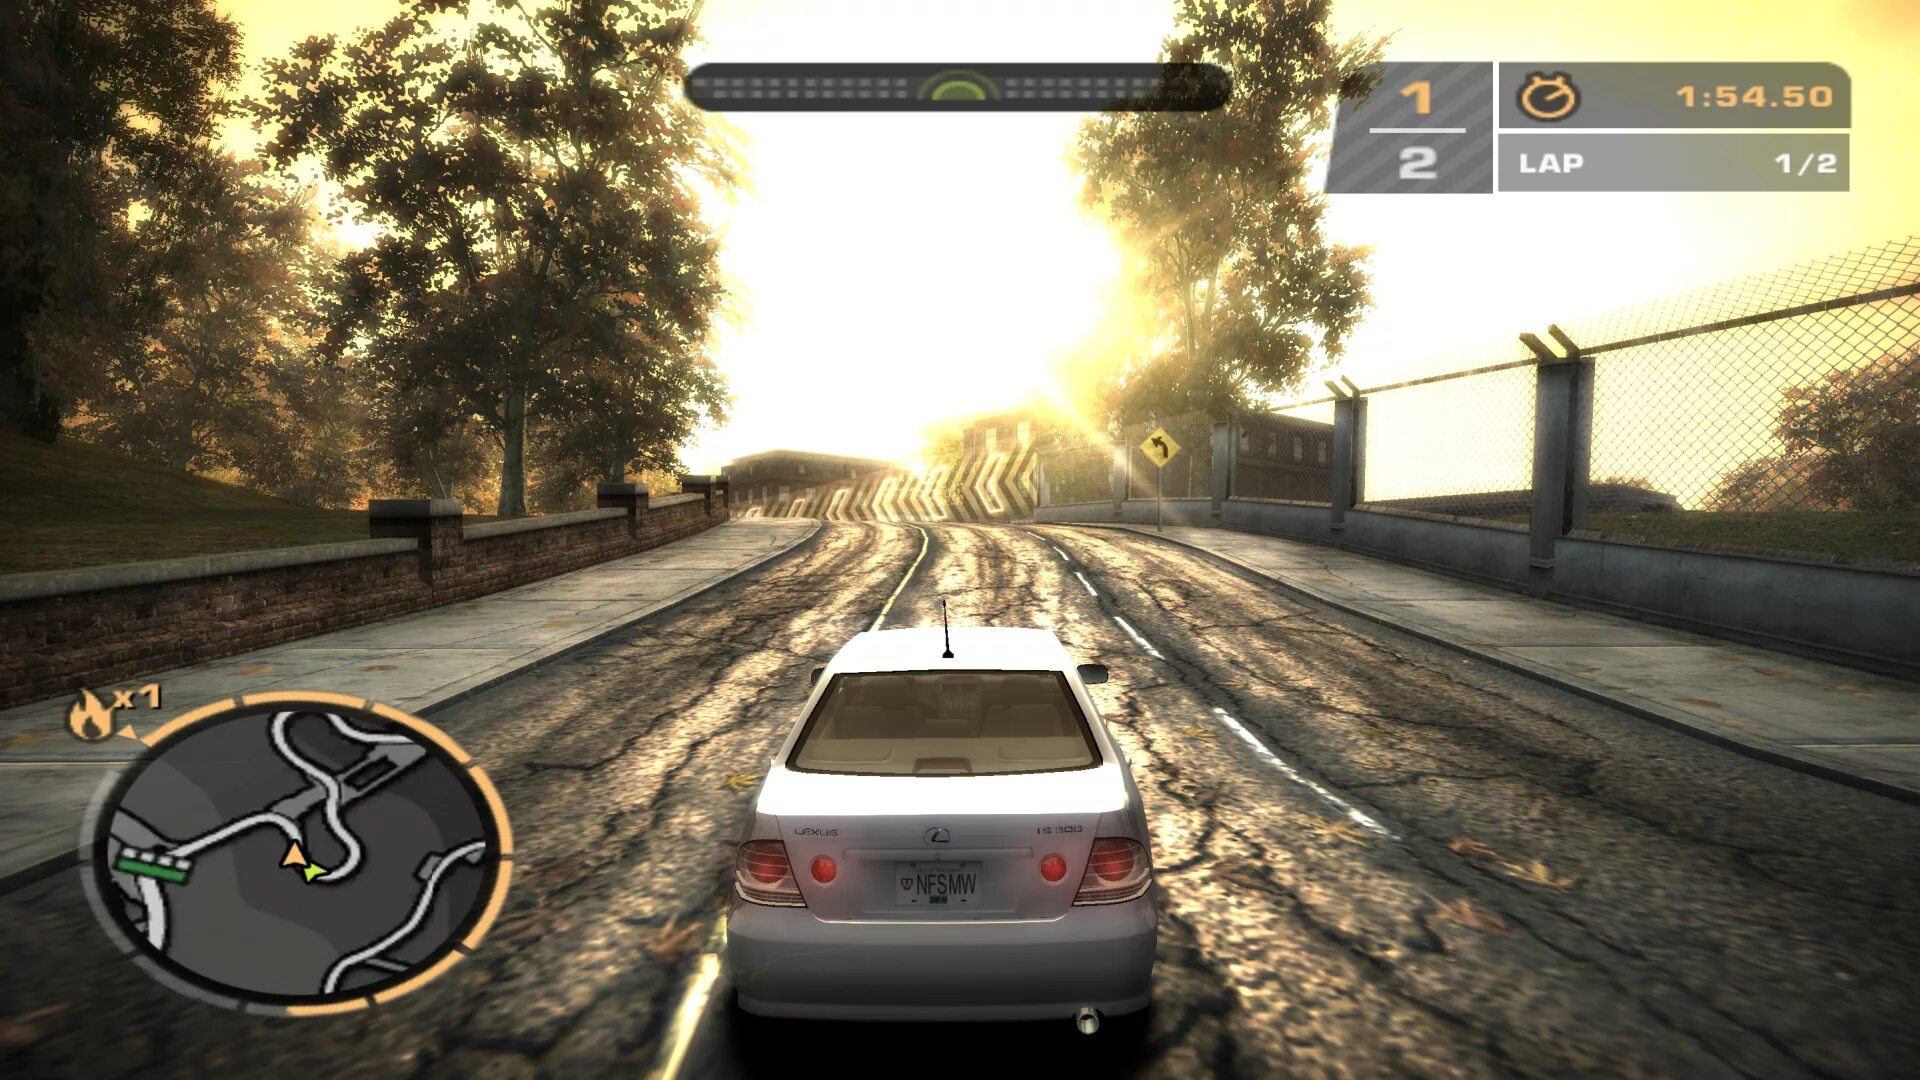 Машины на пс3. NFS MW 2005 ps3. NFS MW ps3. Most wanted 2005 ps3. Need for Speed most wanted 2005 ps3.